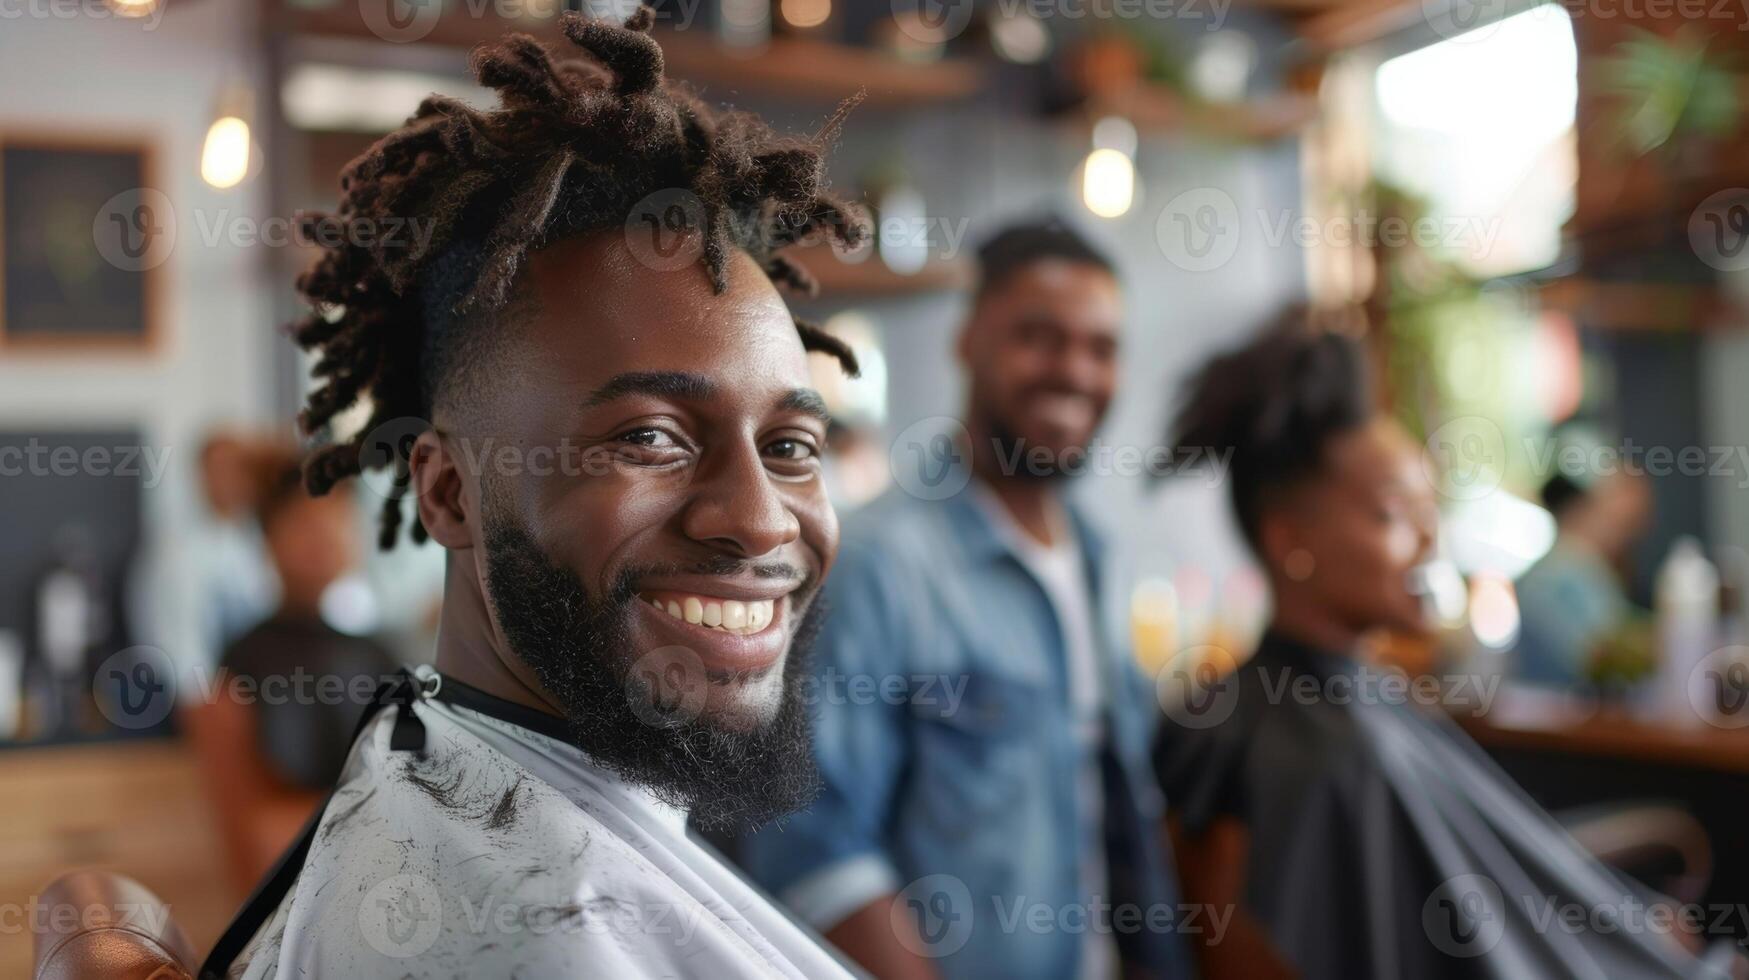 A customer getting a fresh hair and proudly showing it off to his friends with a big smile photo